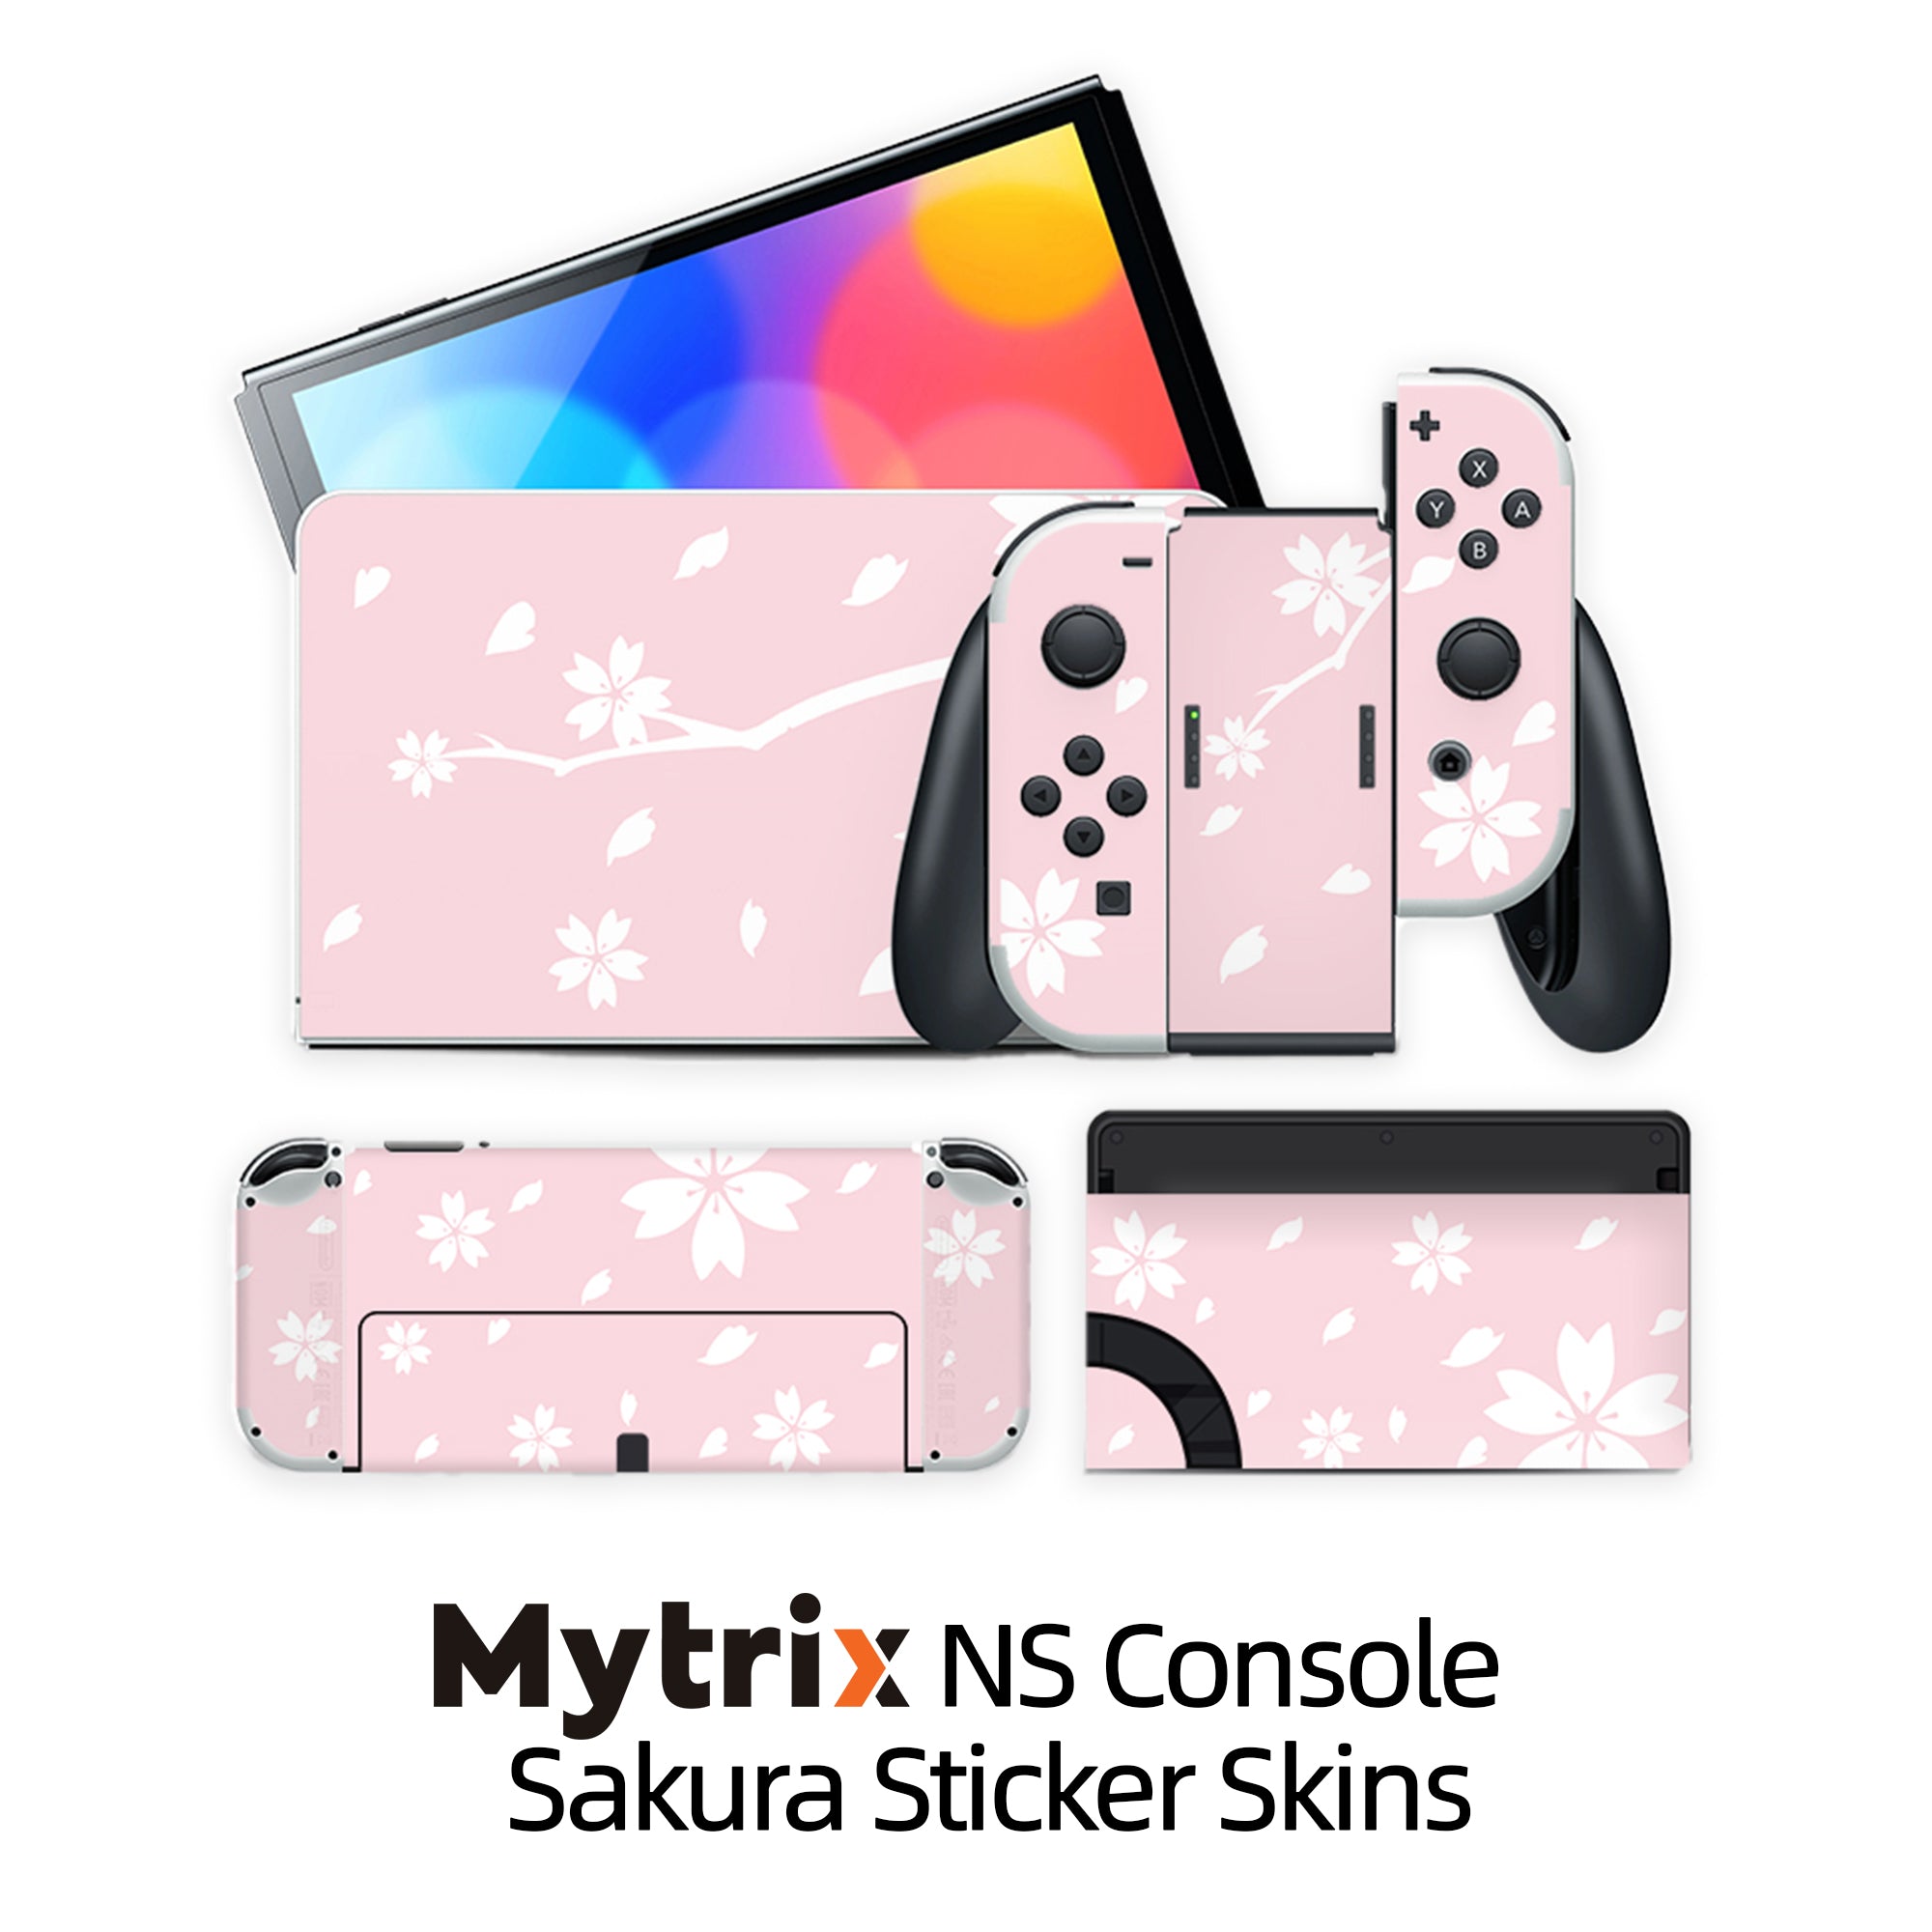 2022 New Nintendo Switch OLED Model Neon Red Blue with Super Smash Bros. Ultimate and Mytrix Full Body Skin Sticker for NS OLED Console, Dock and Joycons - Sakura Pink